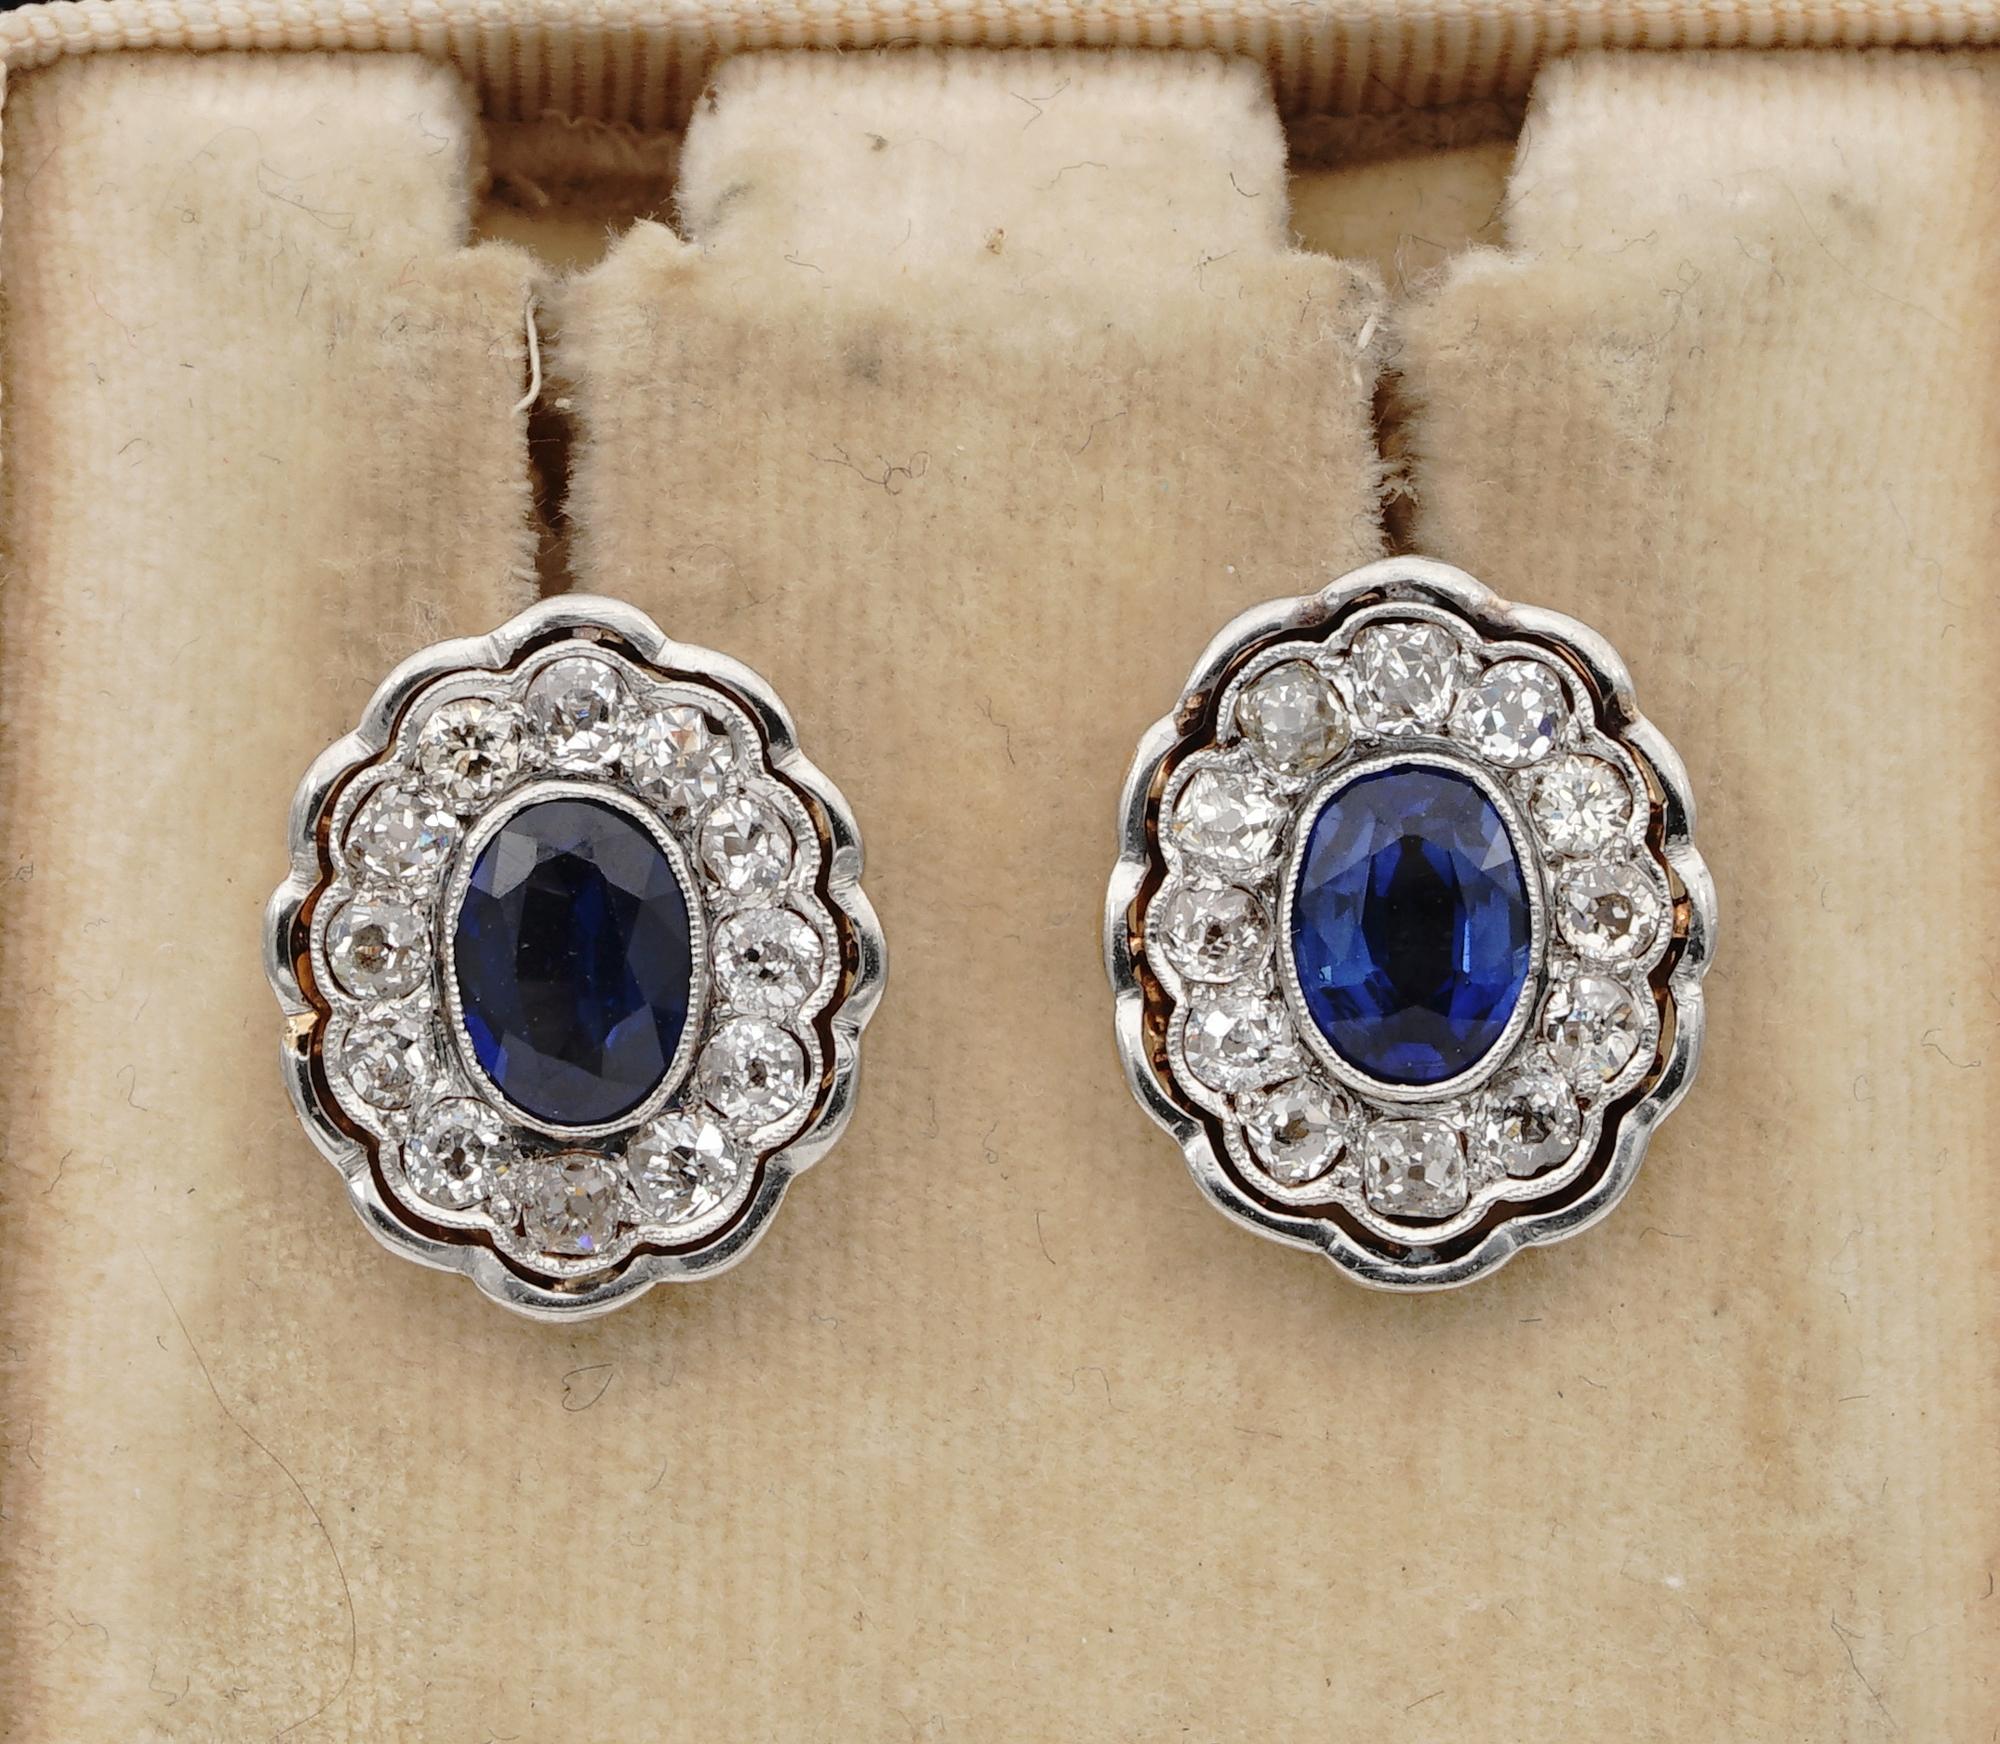 The rarity in Nature!

Rare, adorable, authentic Edwardian period Diamond and Sapphire ear studs
Masterfully hand crafted of solid 18 KT gold and Platinum
The shape takes inspiration by the centre mother nature gift which are two 100% NATURAL NO